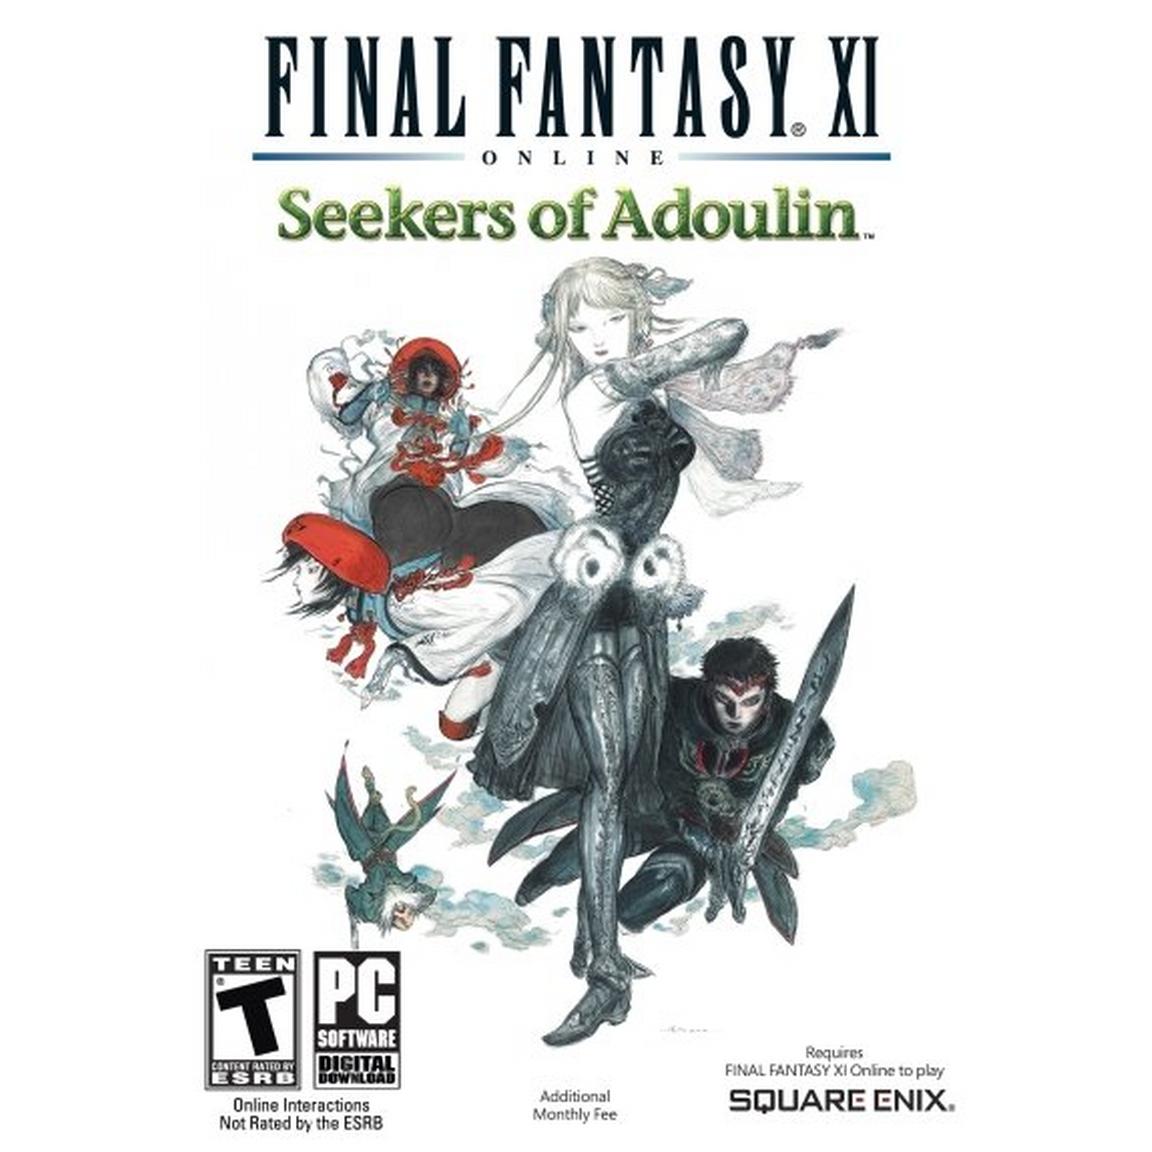 FINAL FANTASY XI Seekers of Adoulin - PC -  Square Enix, ESD-IMP-W4684